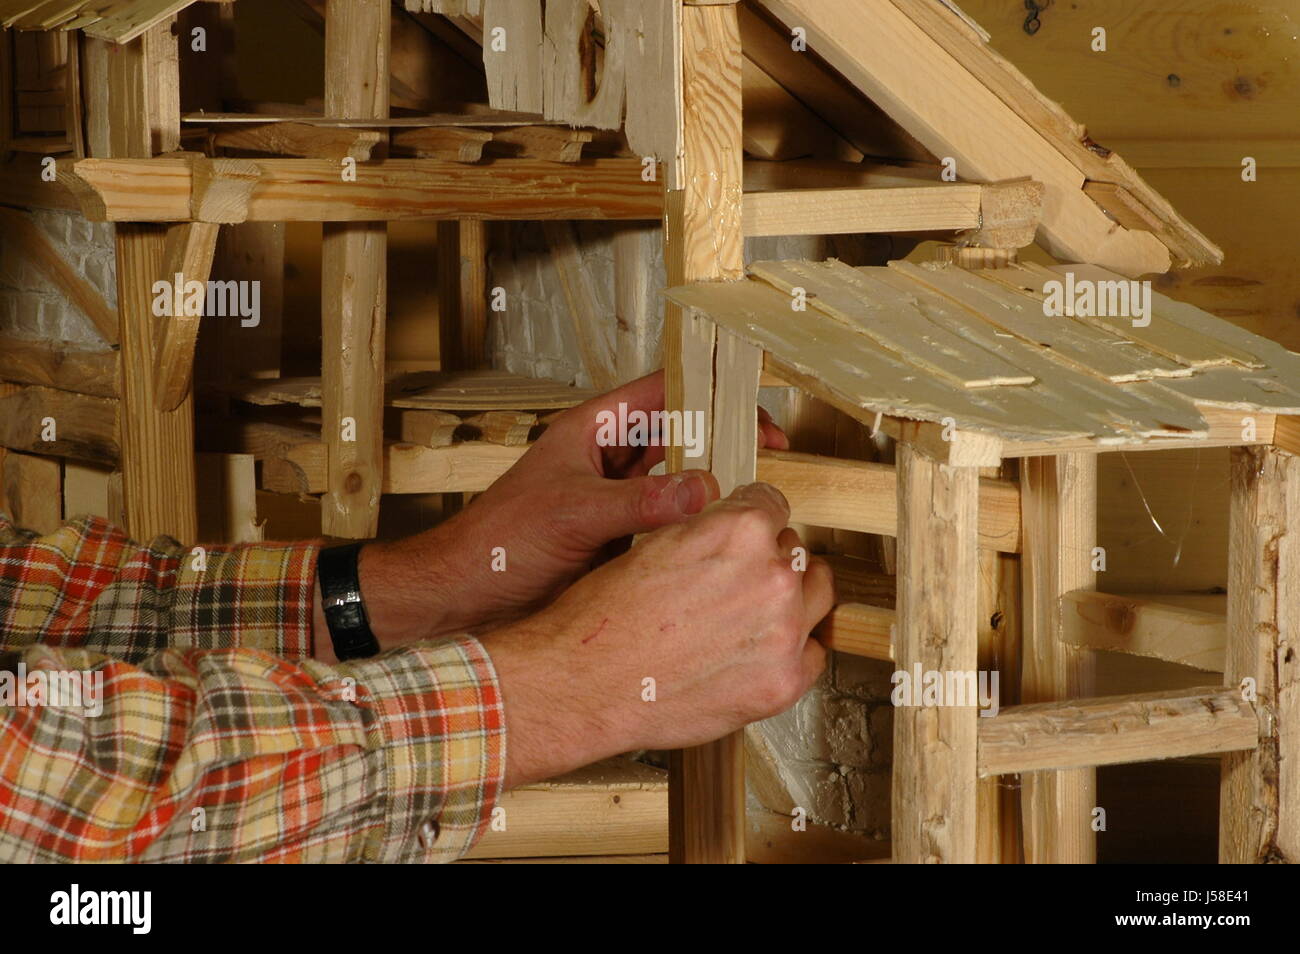 hand hands wood stable do handicrafts traditions advent season manger plywood Stock Photo